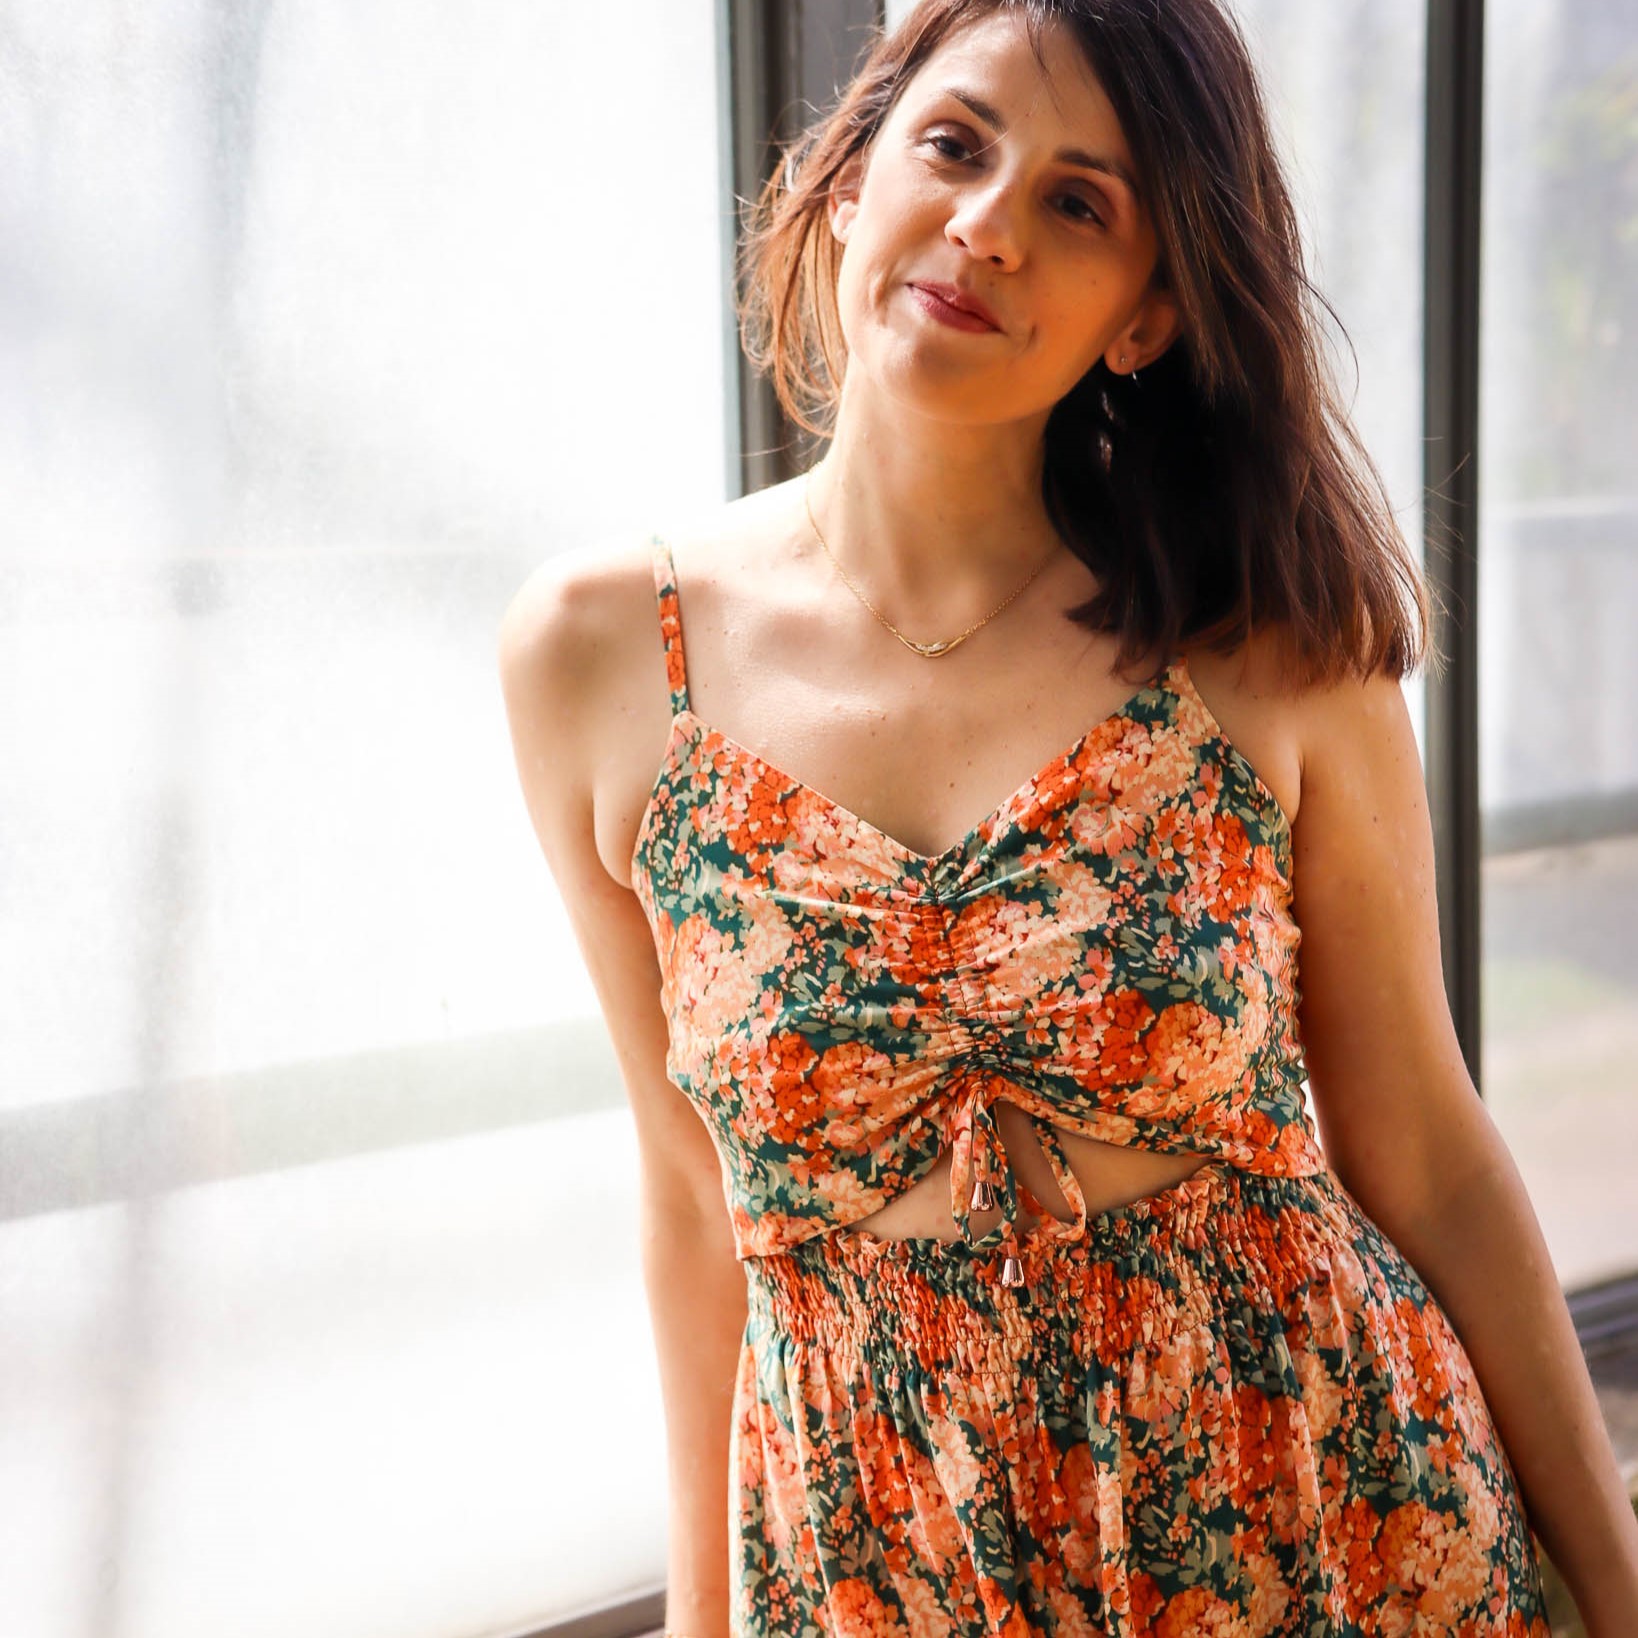 model wearing floral dress with gathering